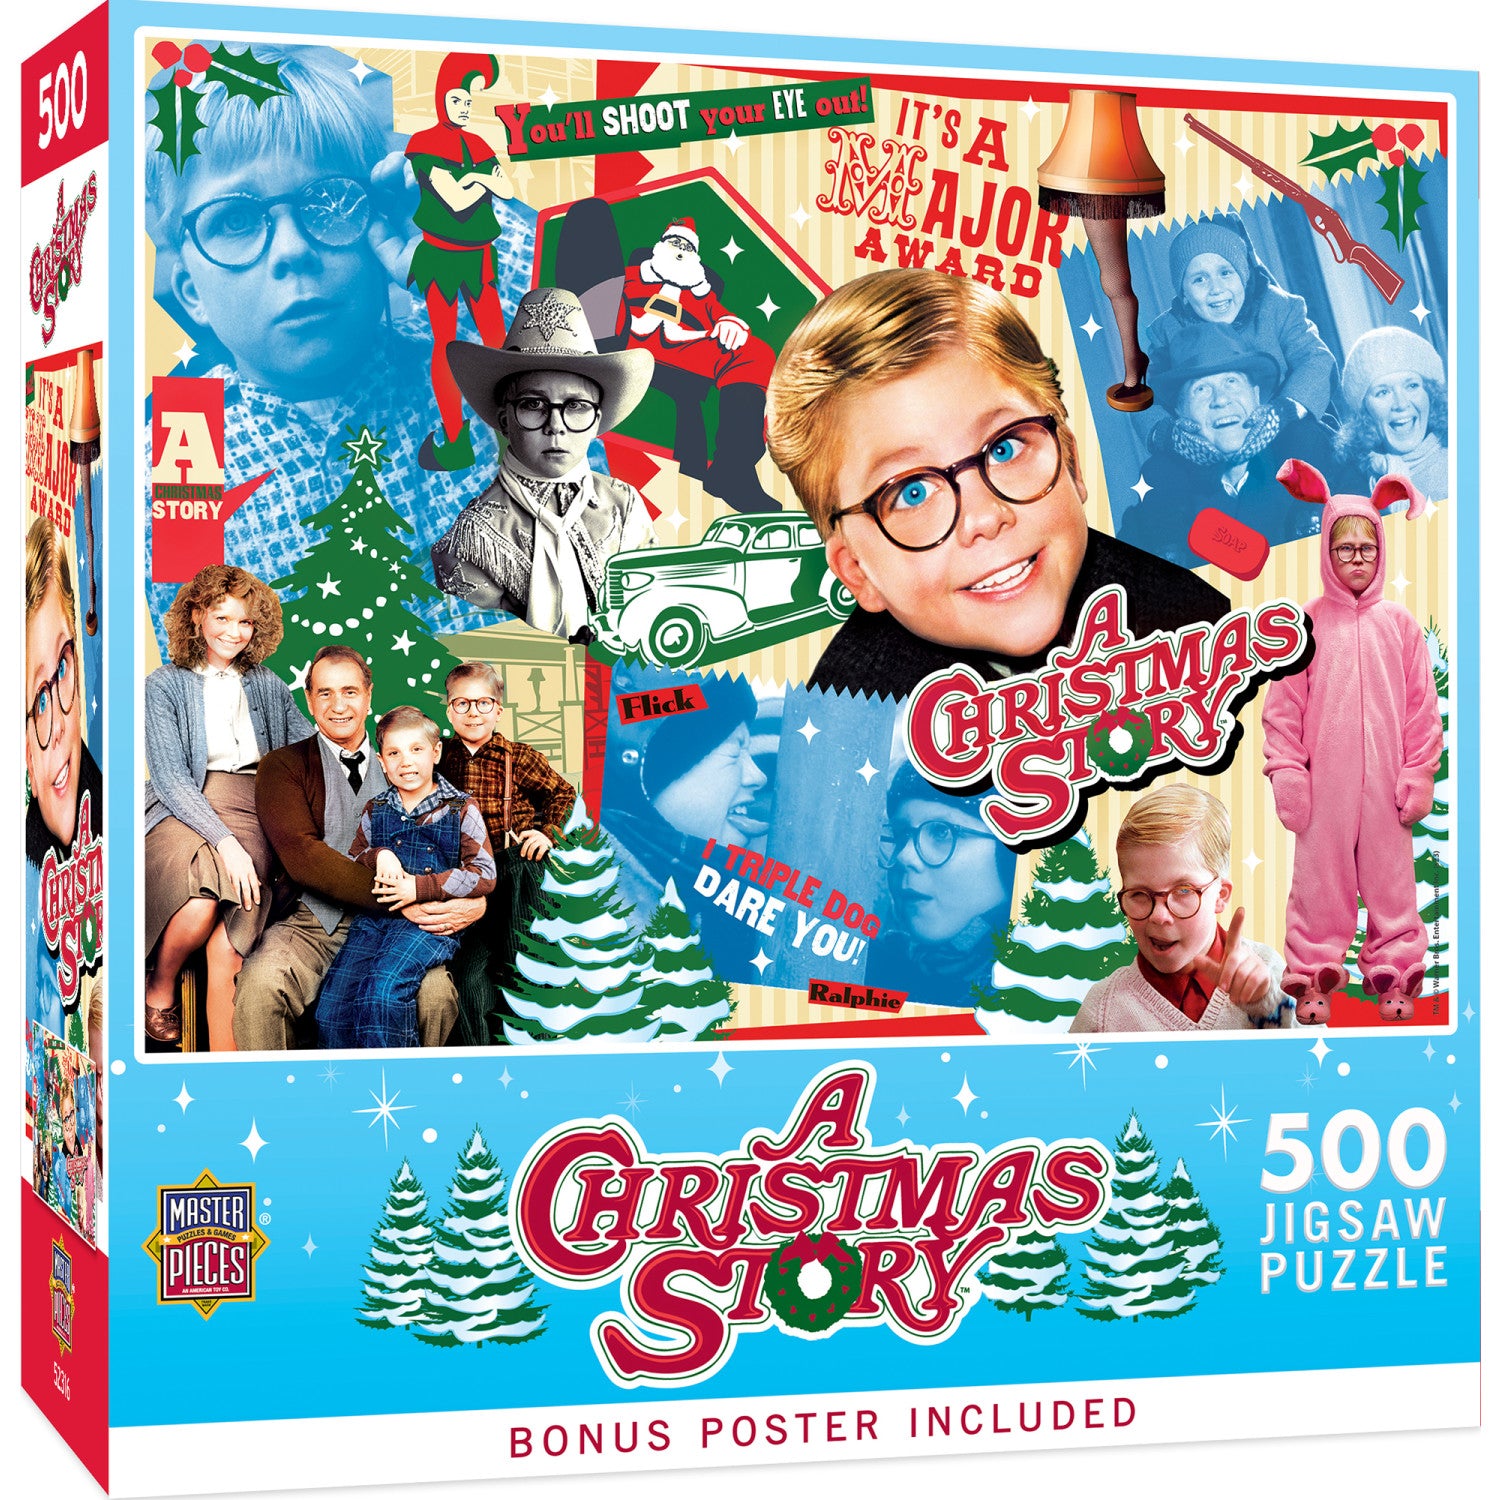 A Christmas Story - 500 Piece Jigsaw Puzzle